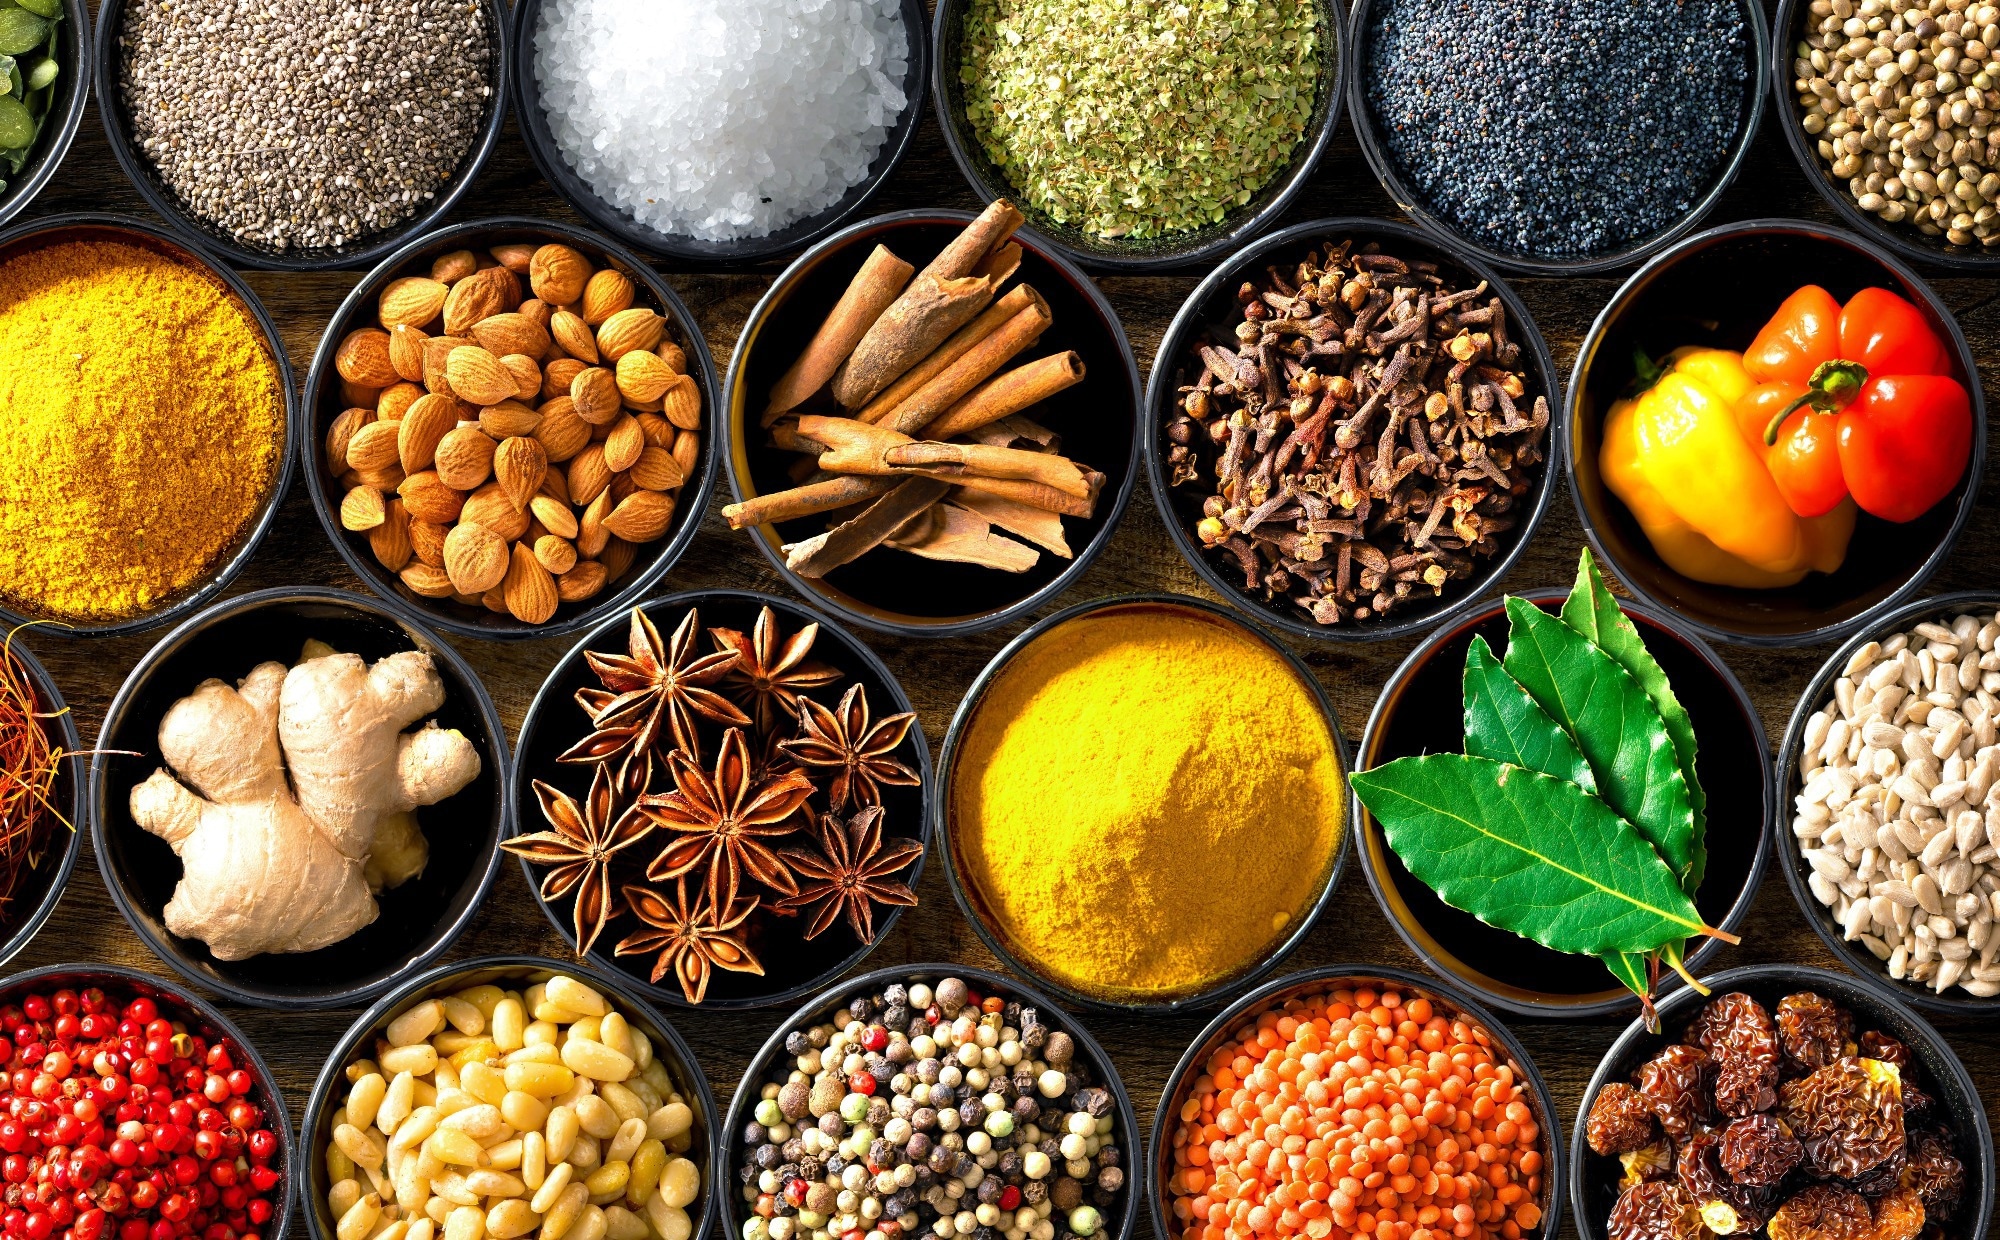 Study: Effects of Culinary Spices on Liking and Consumption of Protein Rich Foods in Community-Dwelling Older Adults. Image Credit: Alexander Raths / Shutterstock